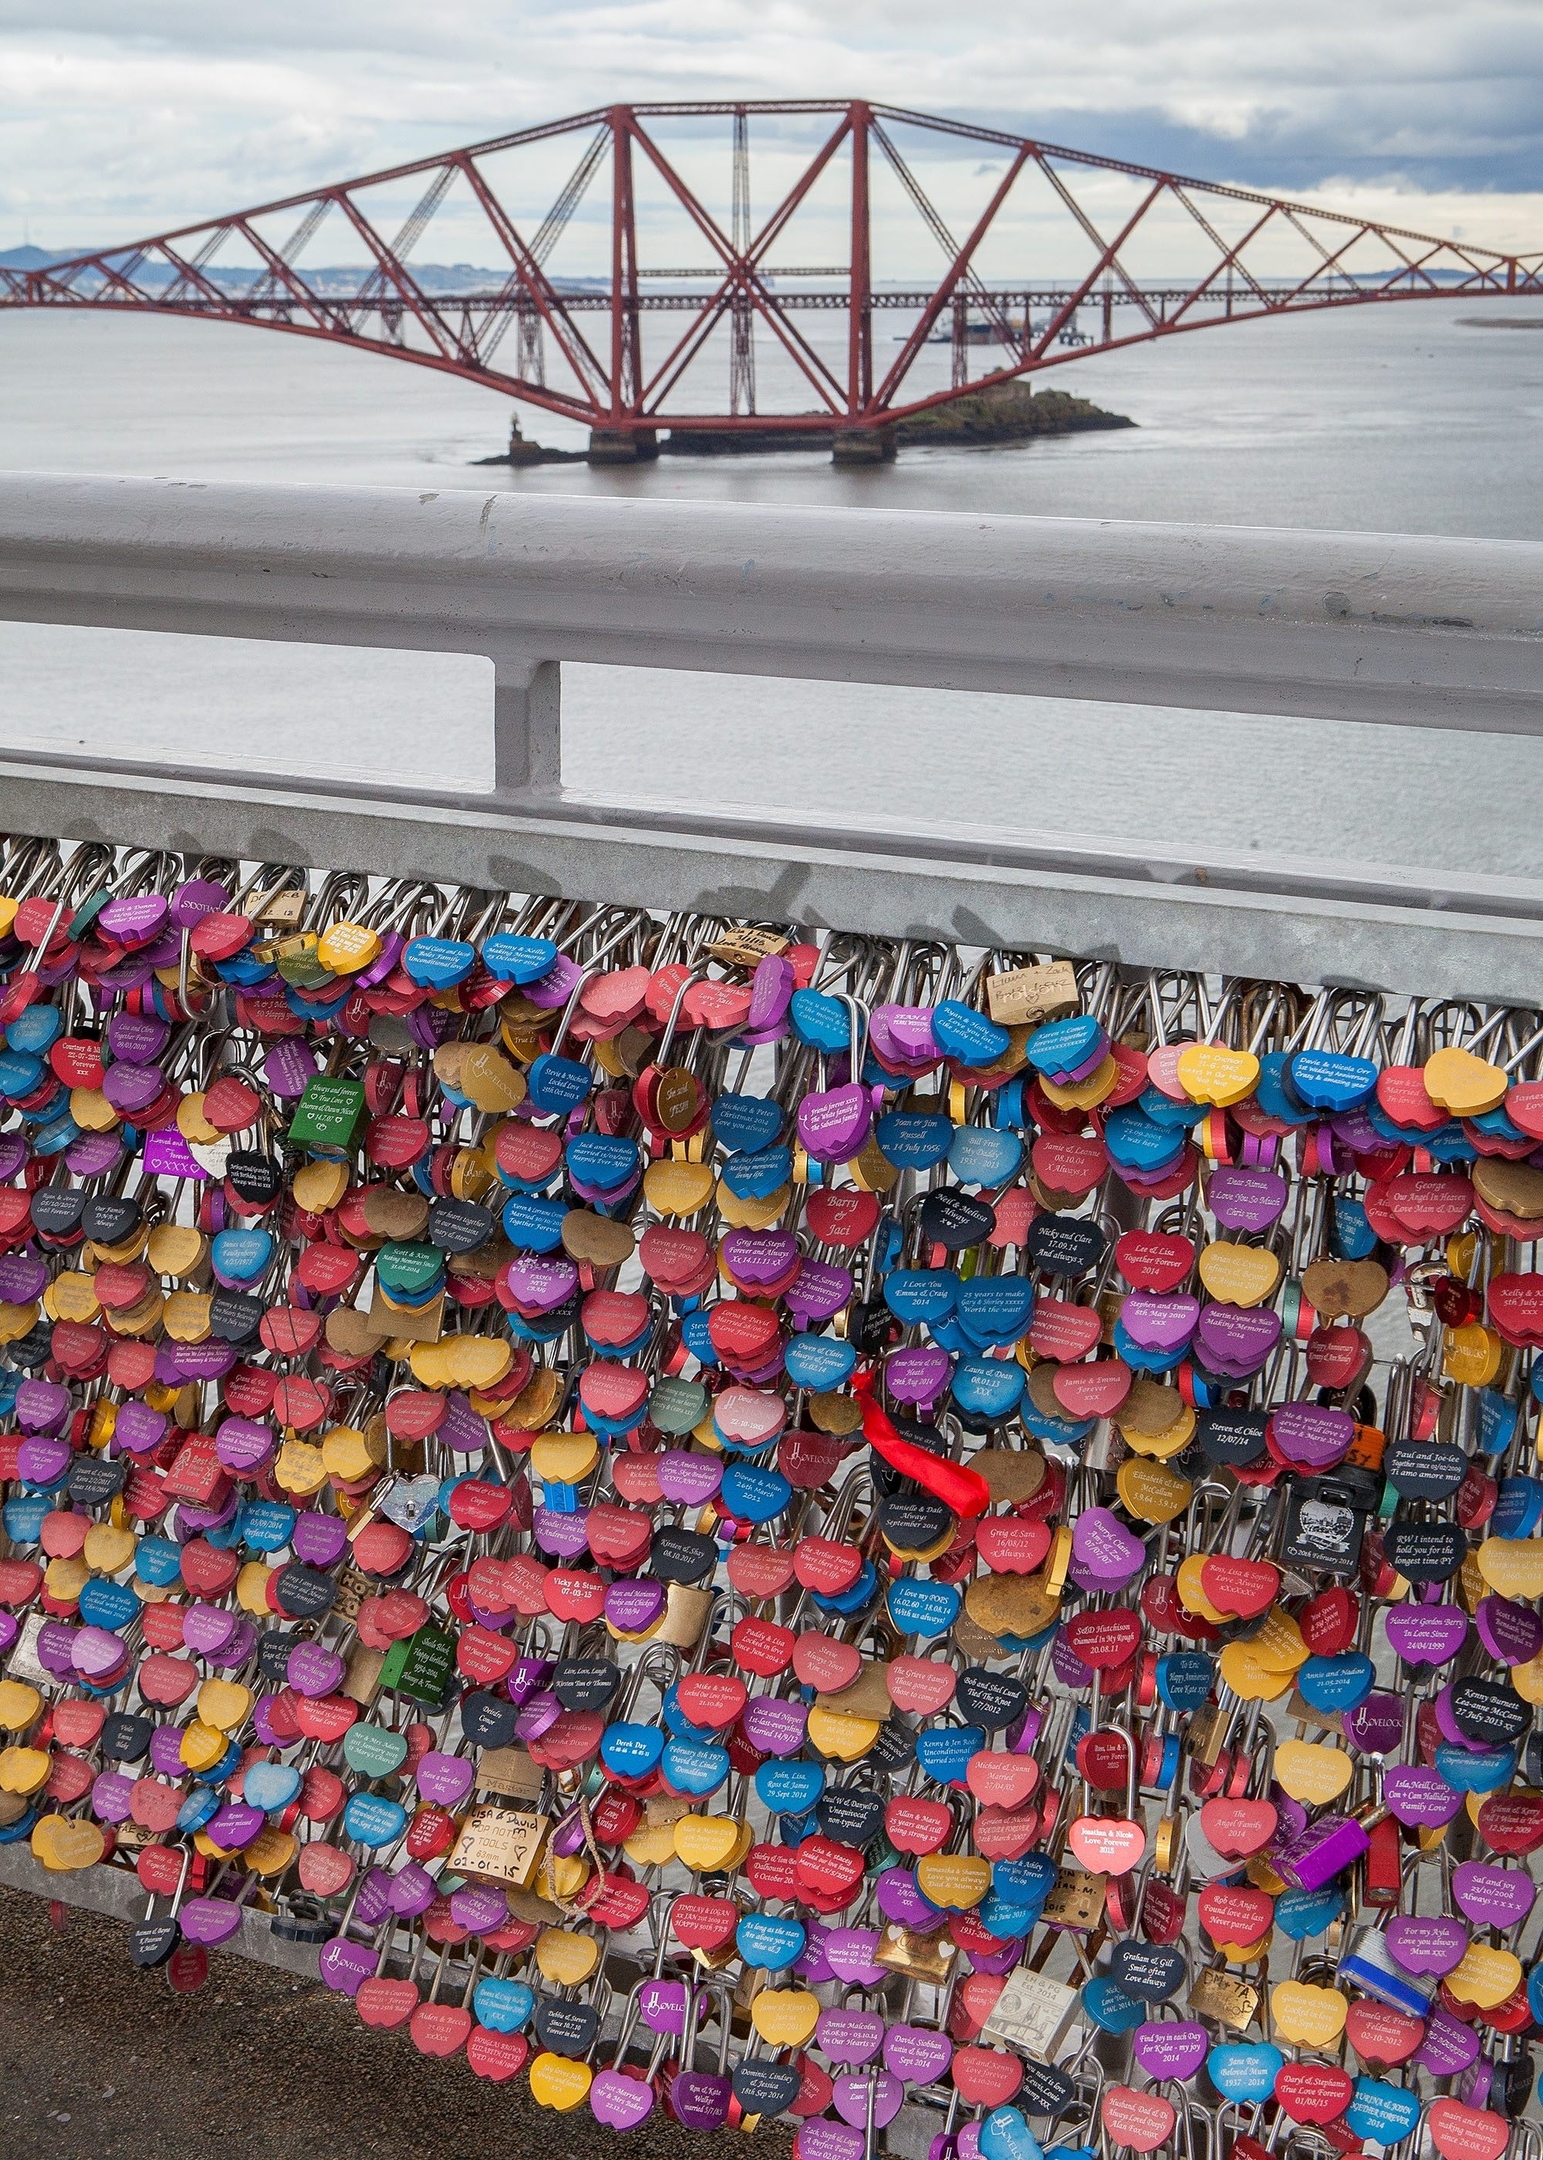 More than 5,382 couples have their names etched onto the love locks that currently sit on two panels on the bridge in South Queensferry.